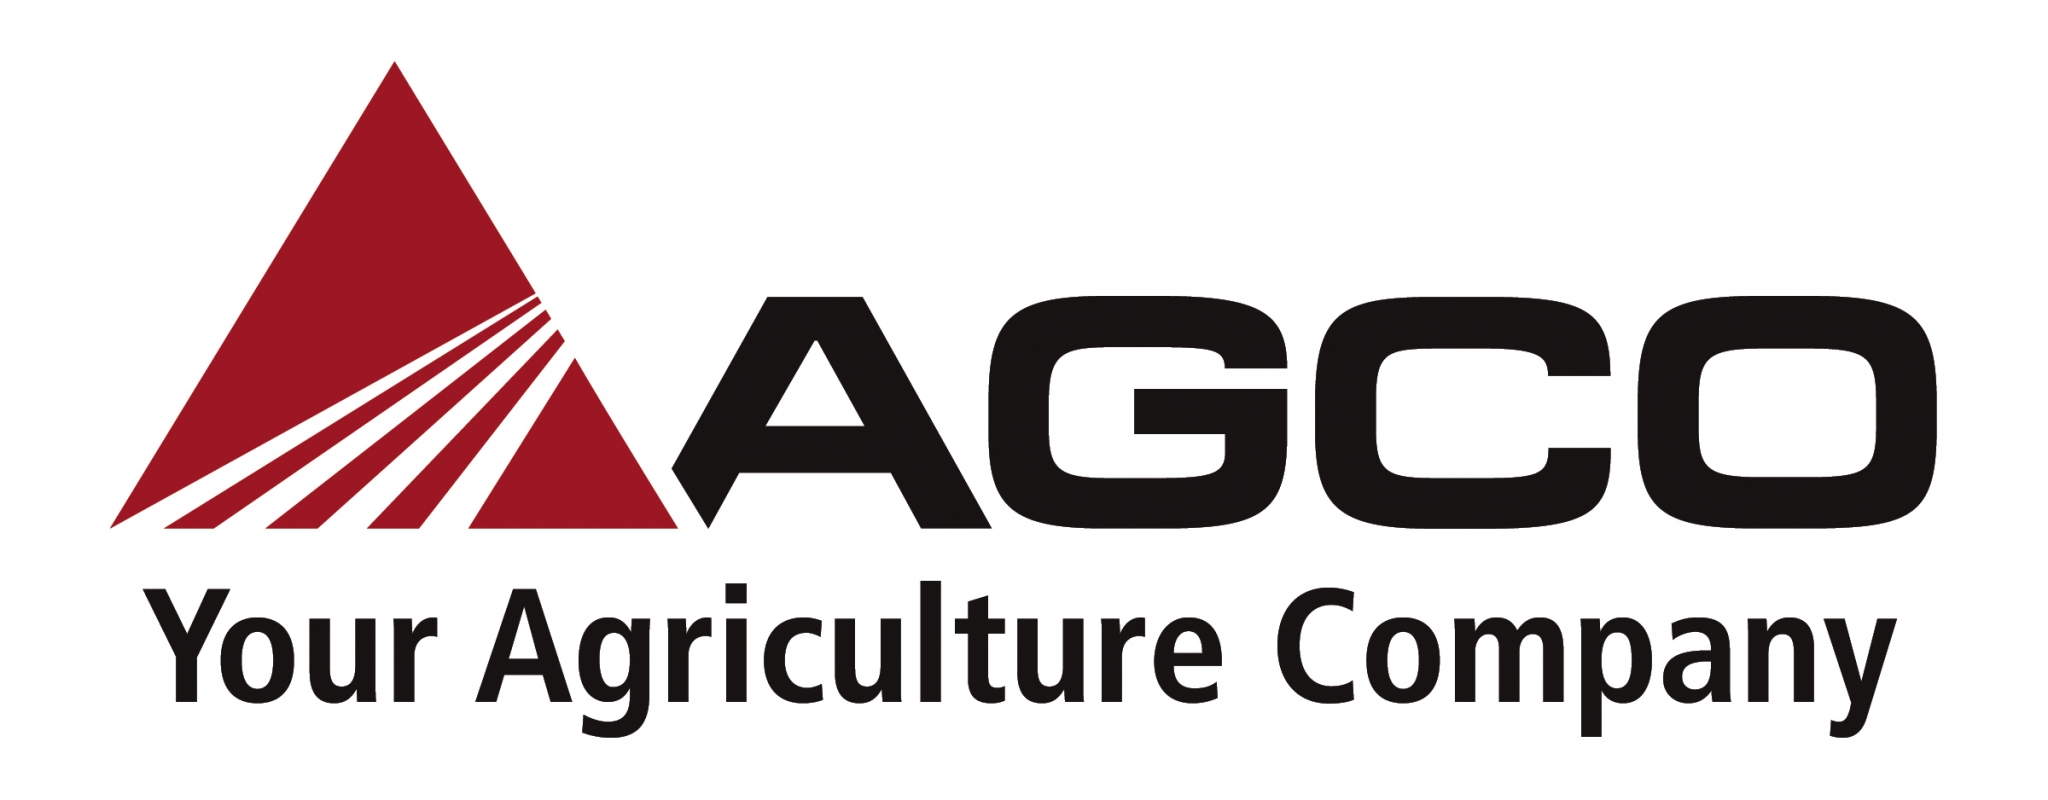 /assets/contentimages/agco.jpg